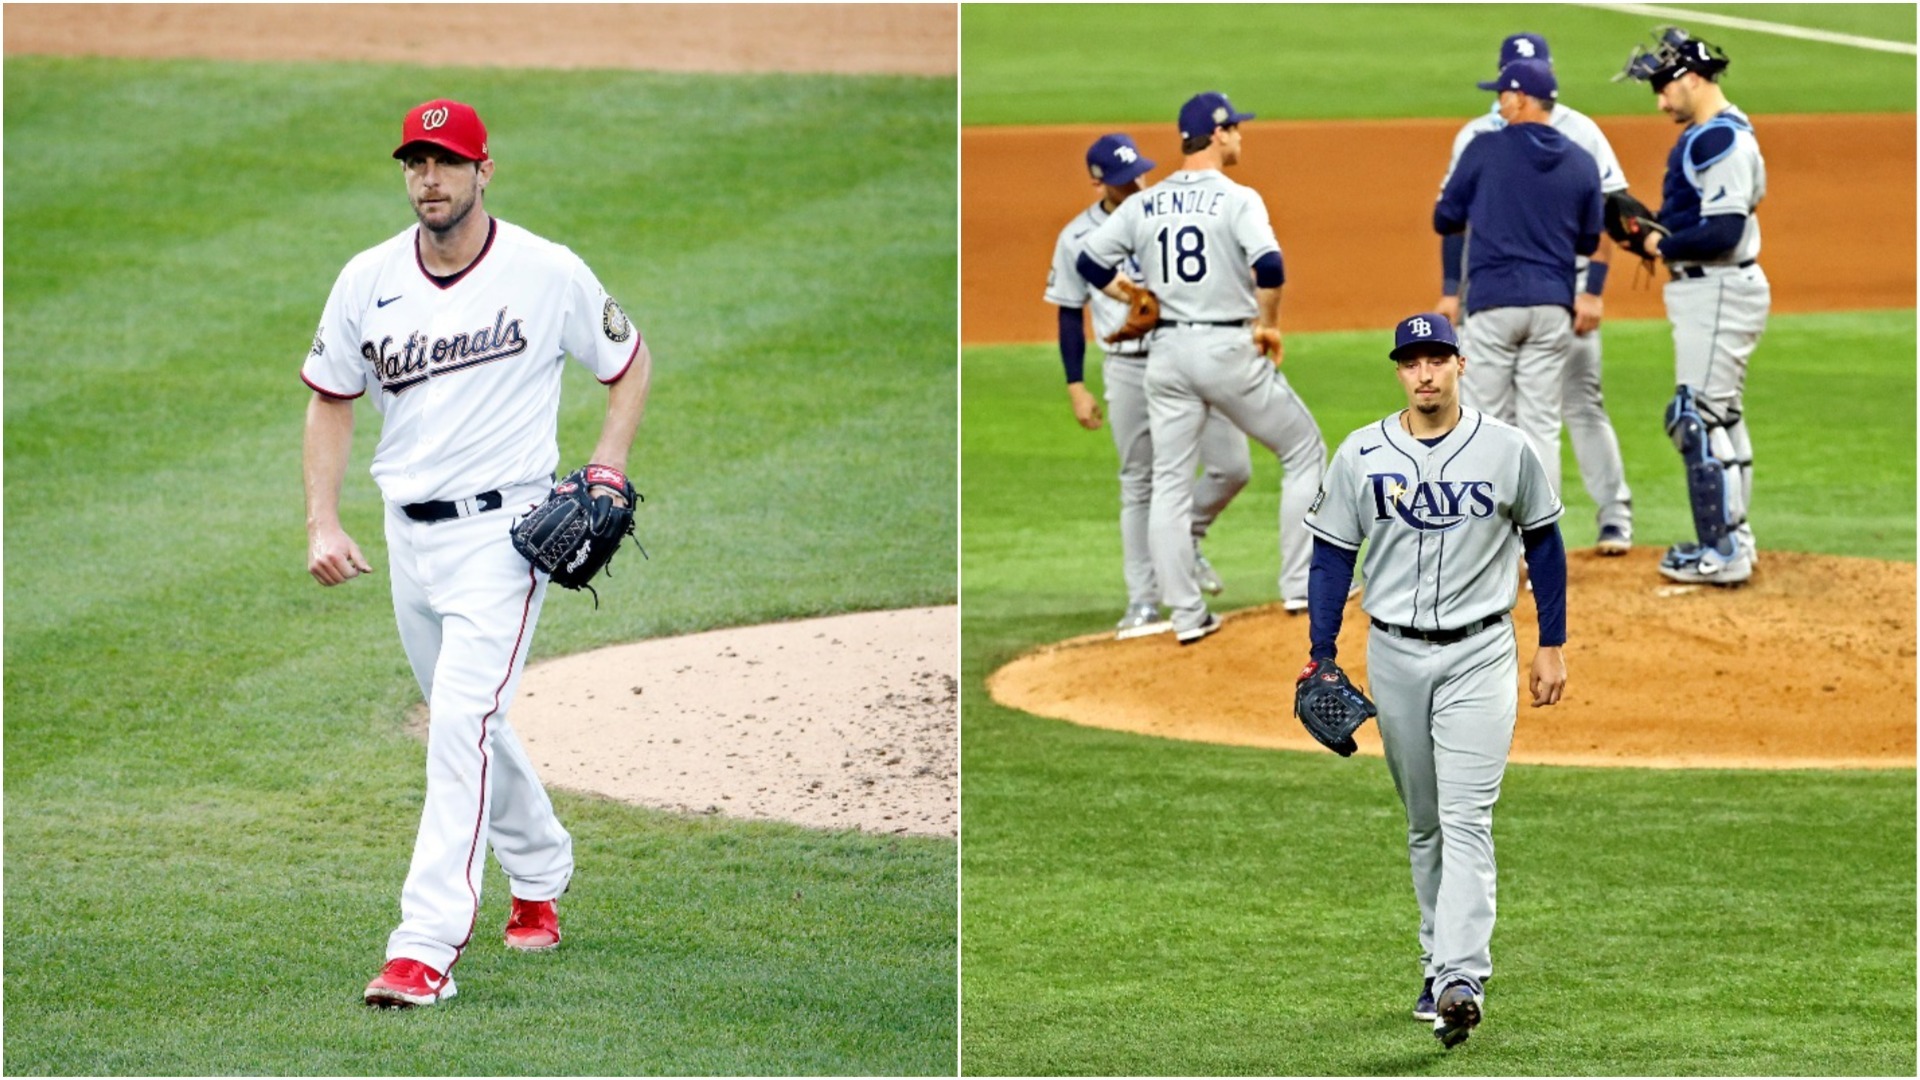 What Was Max Scherzer's Reaction to Blake Snell Being Pulled?